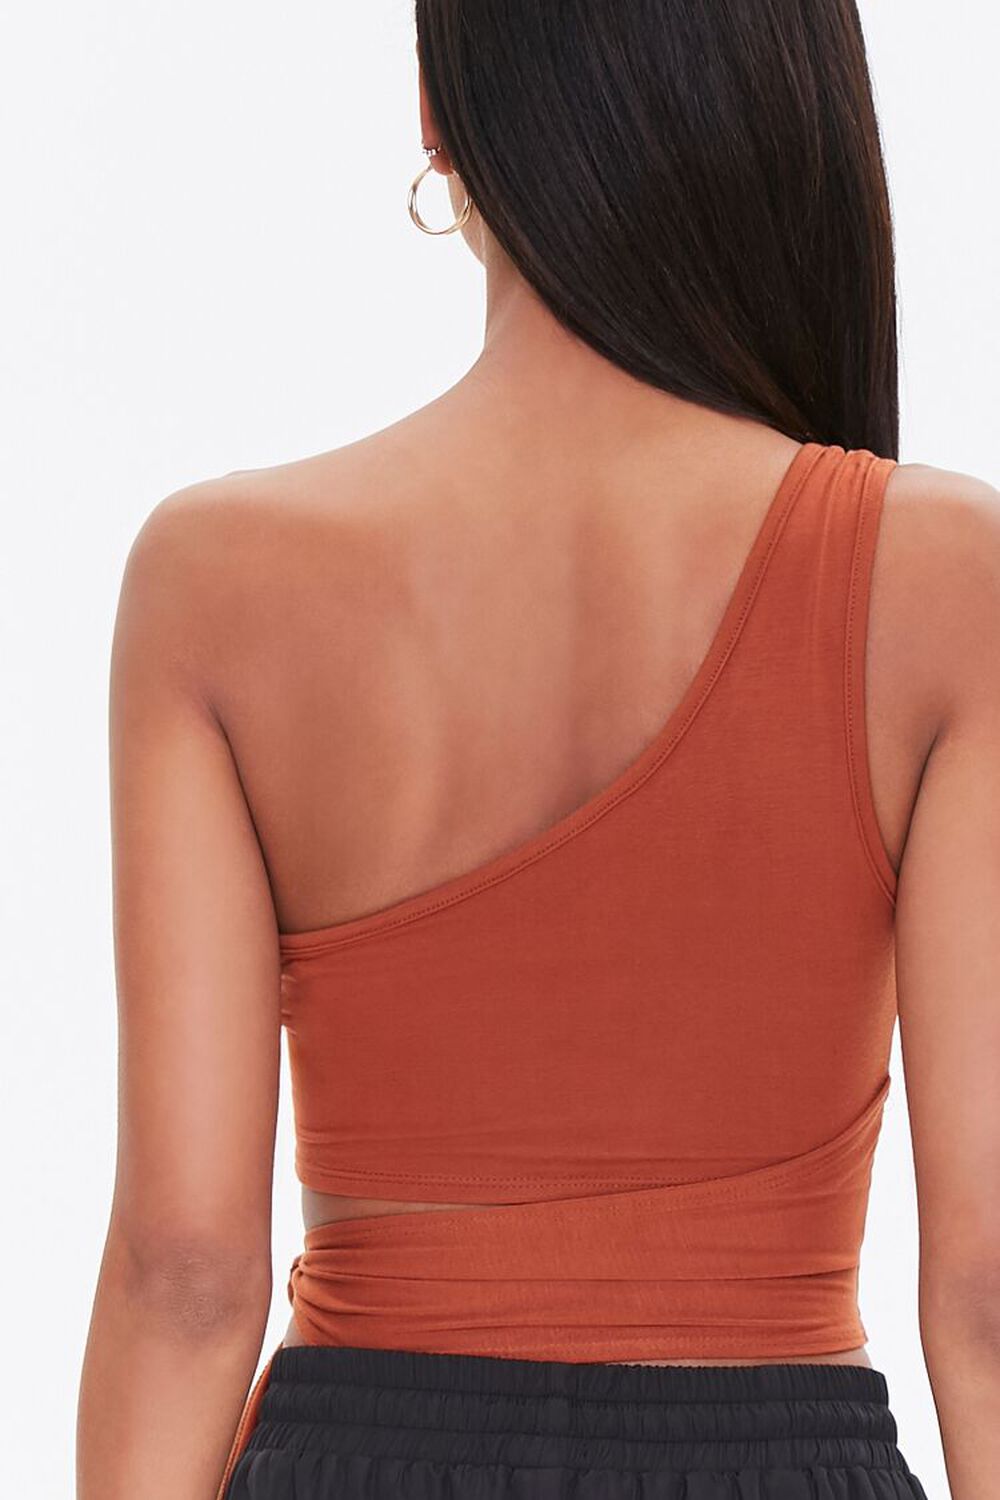 COCOA One-Shoulder Cutout Top, image 3